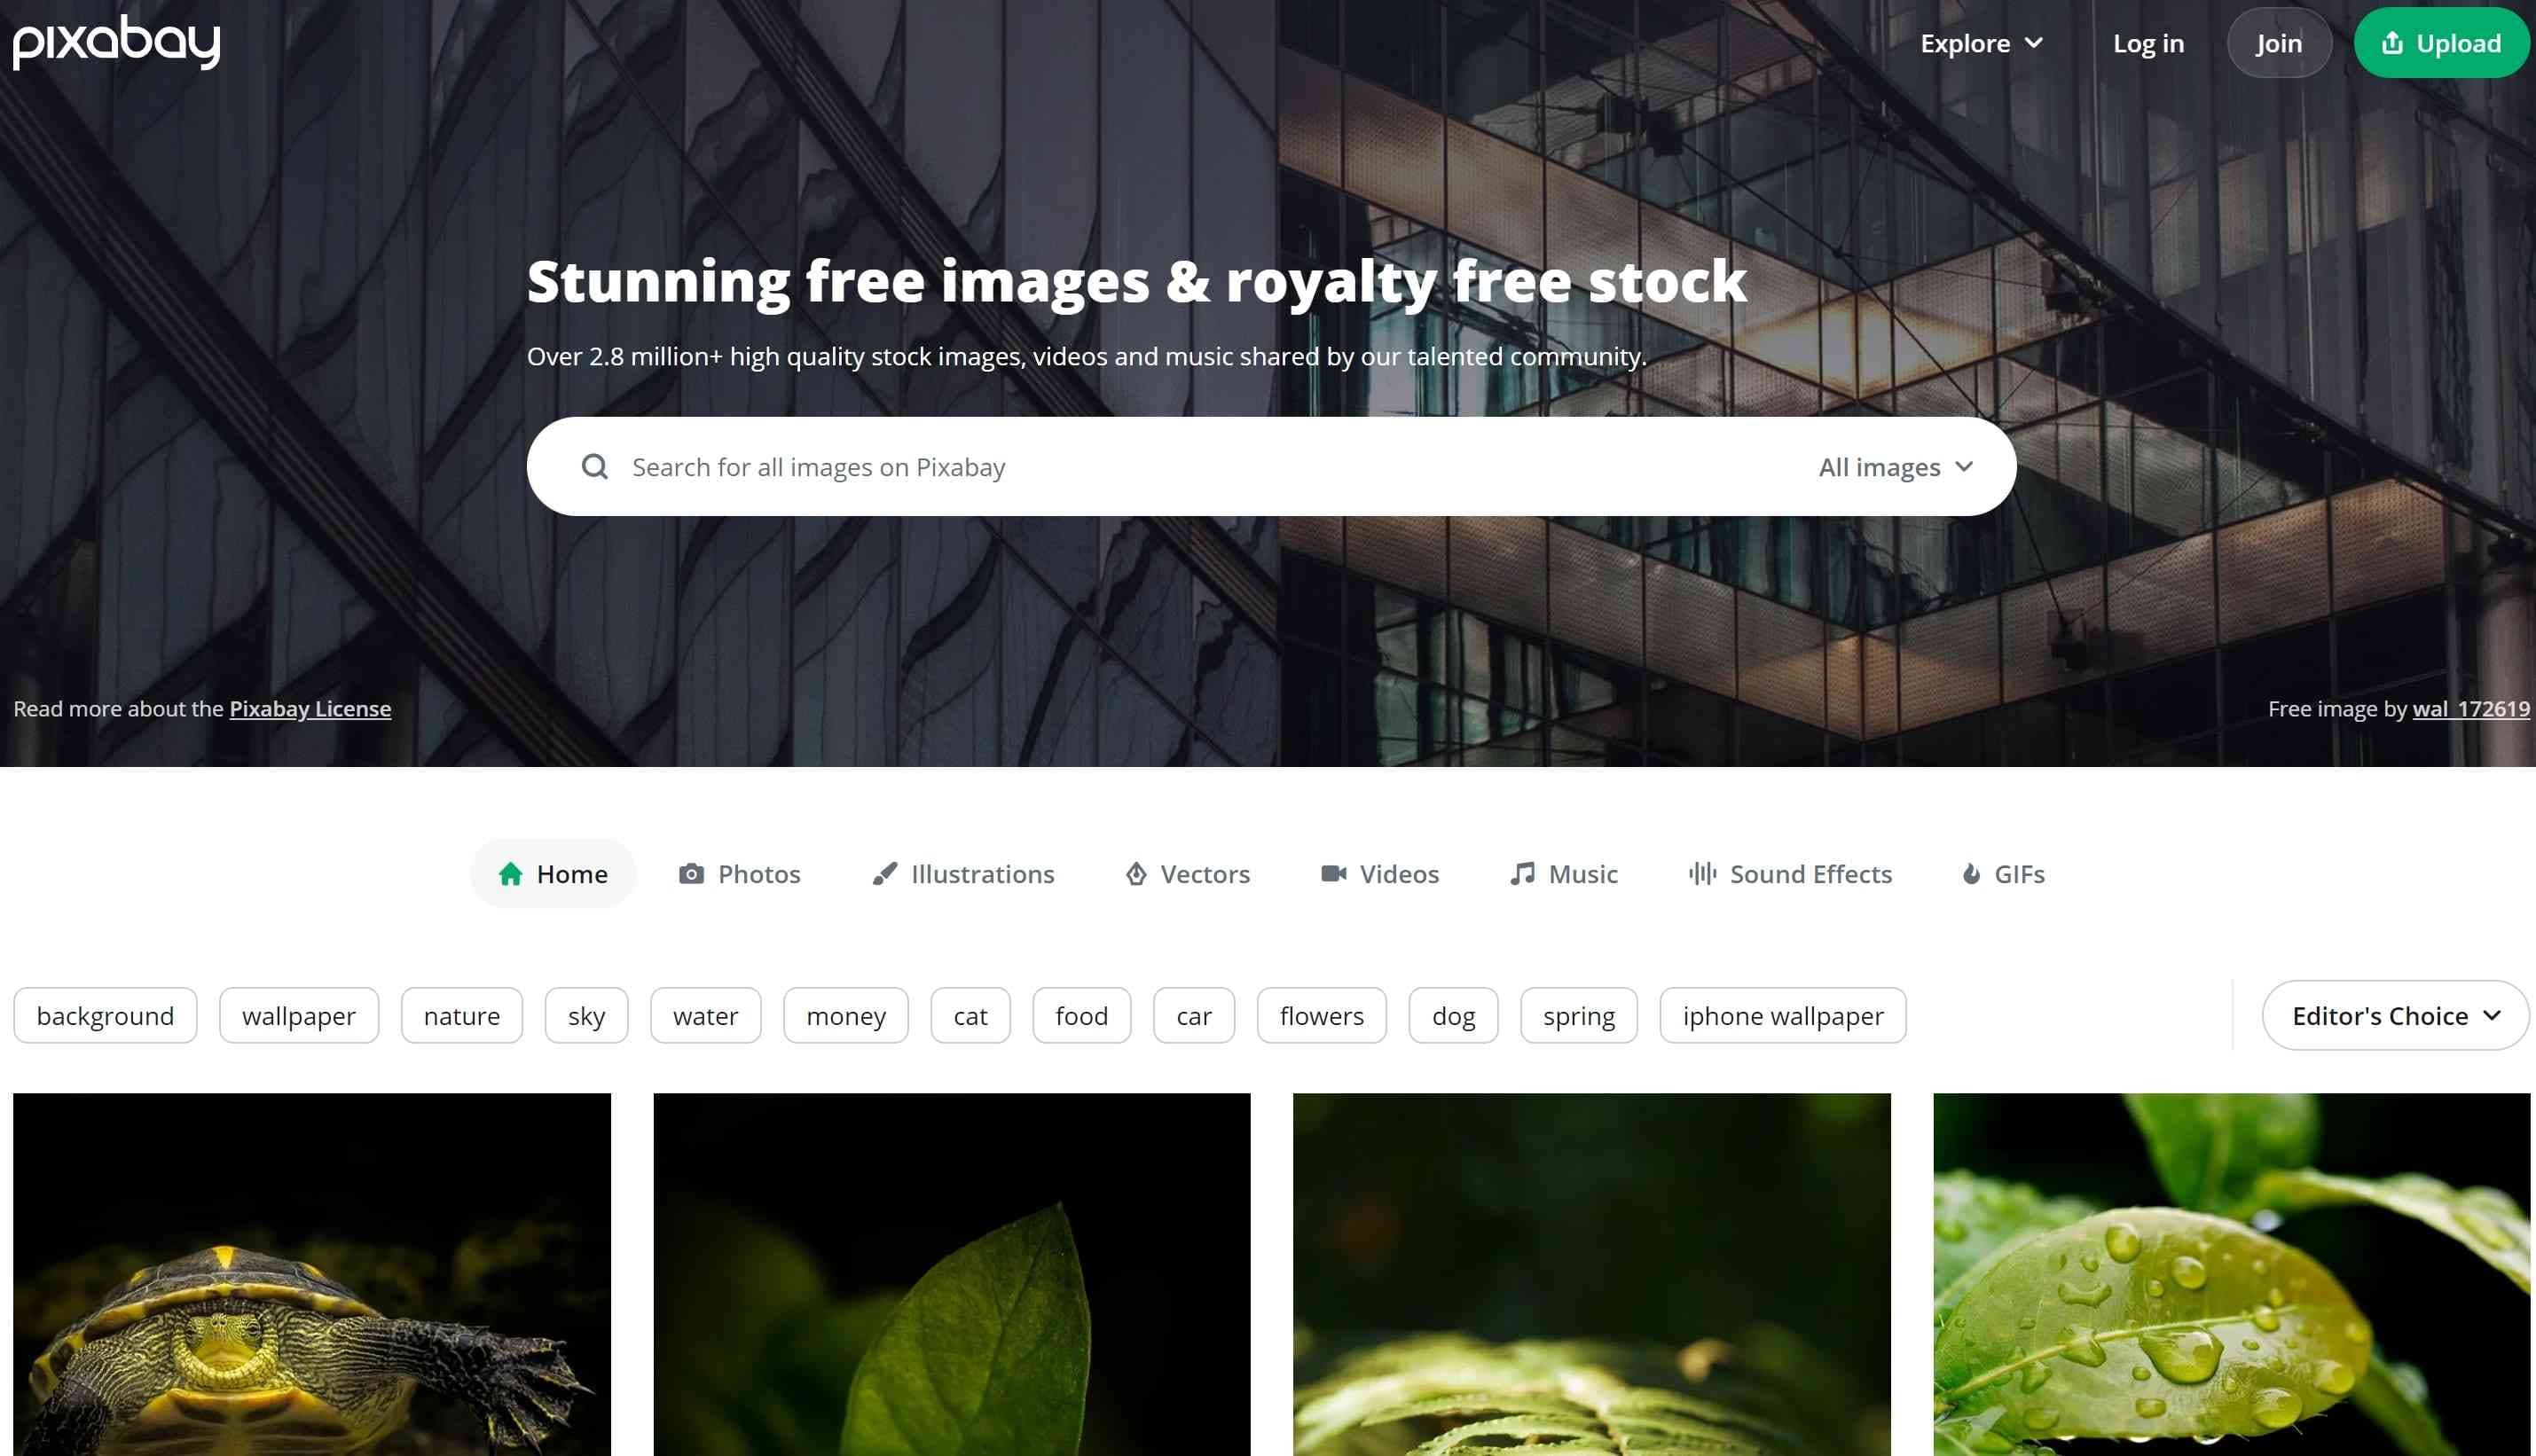 pixabay free stock video download site